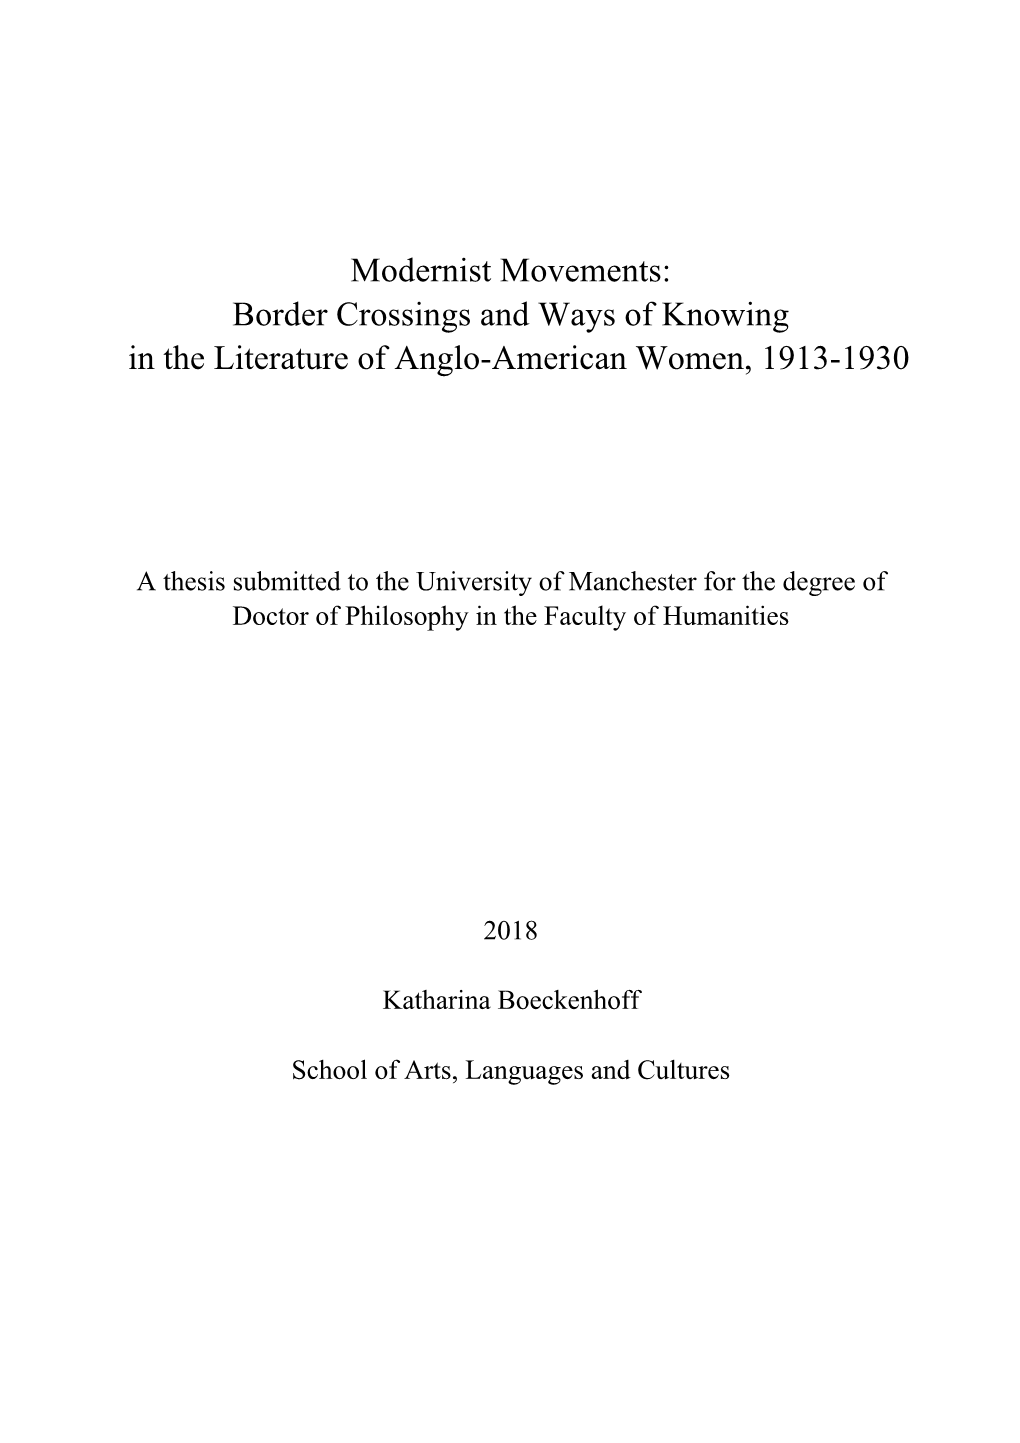 Modernist Movements: Border Crossings and Ways of Knowing in the Literature of Anglo-American Women, 1913-1930